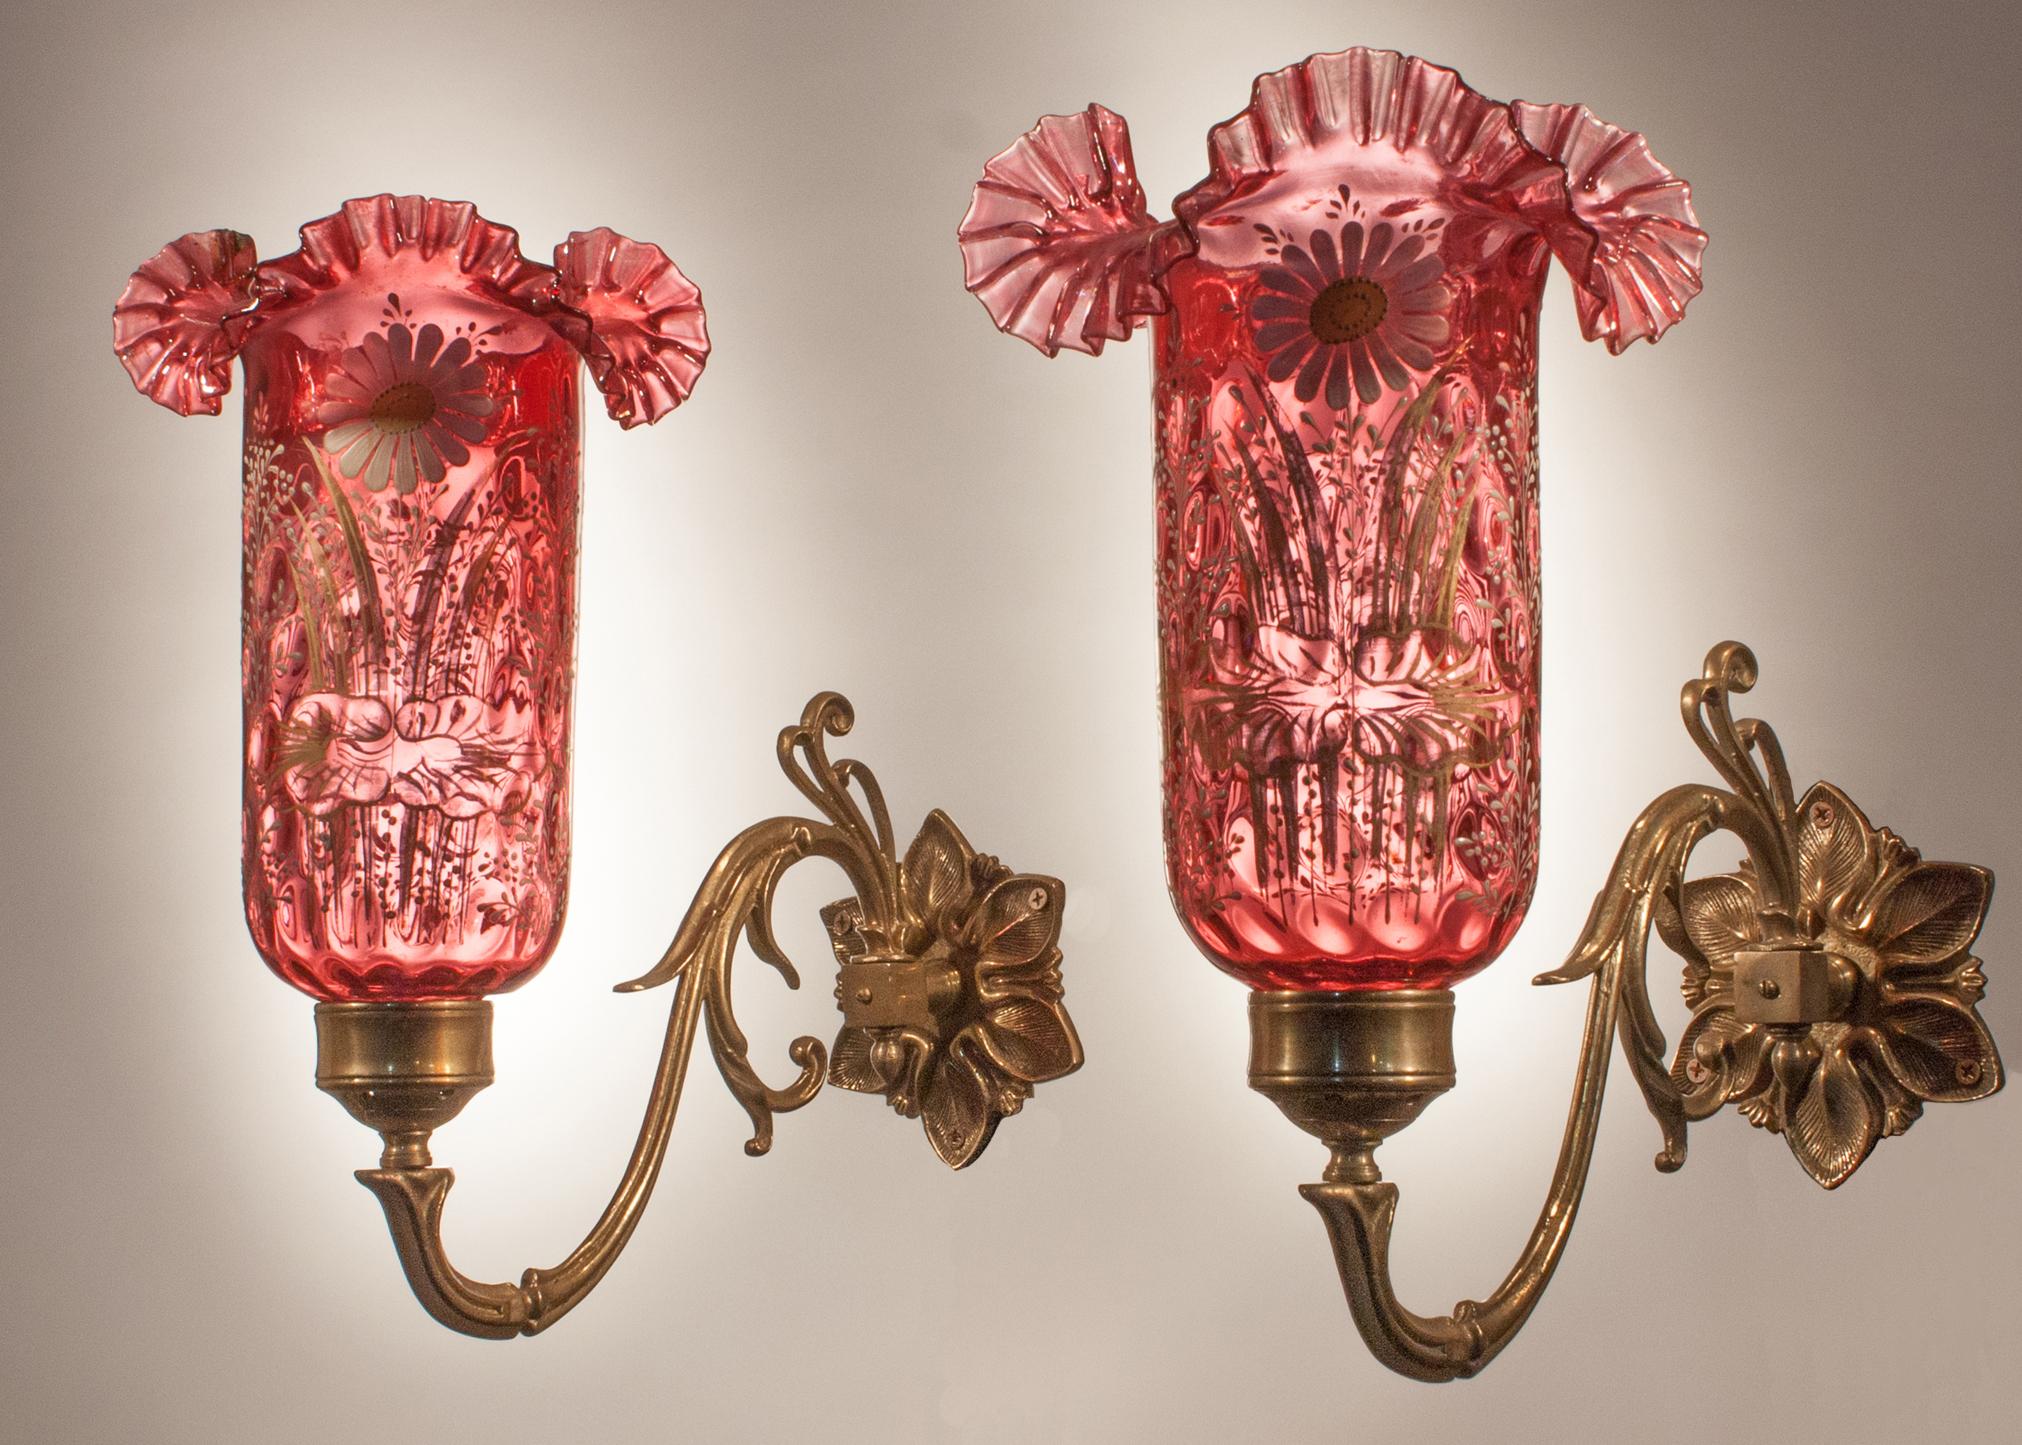 An unusual pair of cranberry colored hand blown glass sconce shades hand painted with a floral relief motif. These circa 1920 Anglo-Indian shades feature delicate ruffling on the rims, with circular dimpling from top to bottom. The wall sconces take